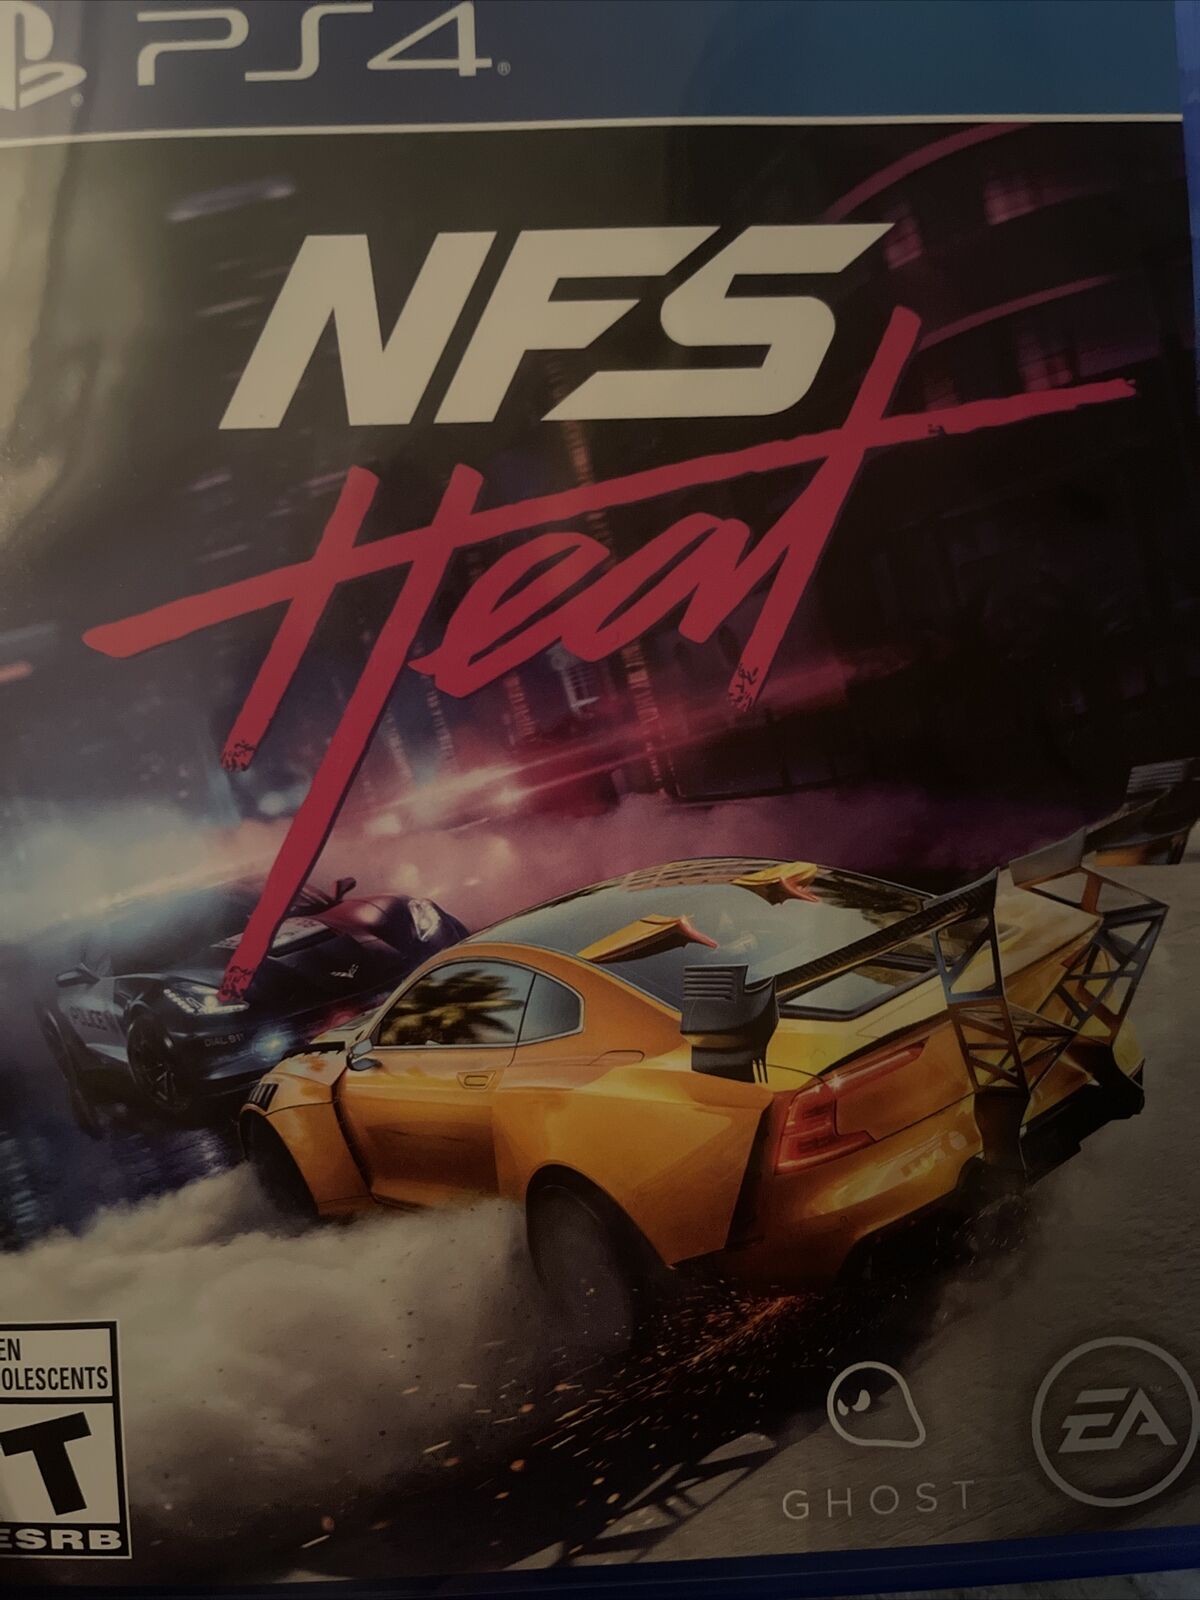 For Speed HEAT Street Video Game 4 PS4 | eBay